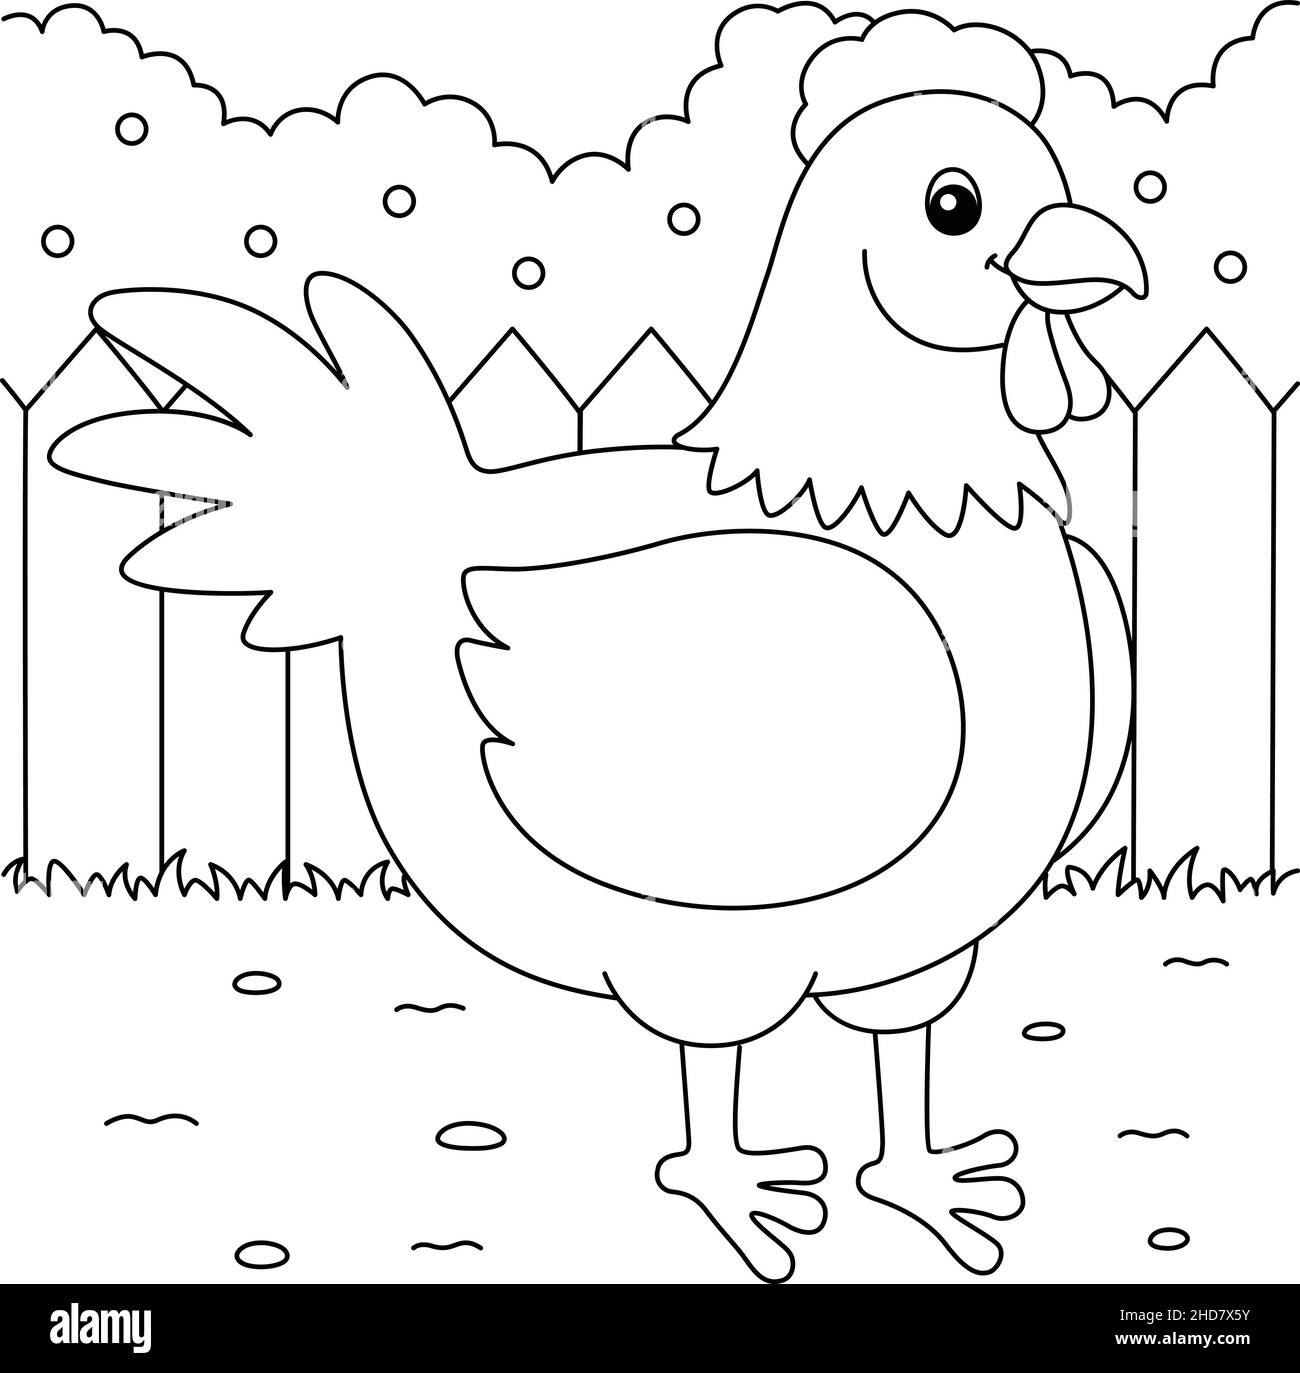 Chicken coloring page for kids stock vector image art